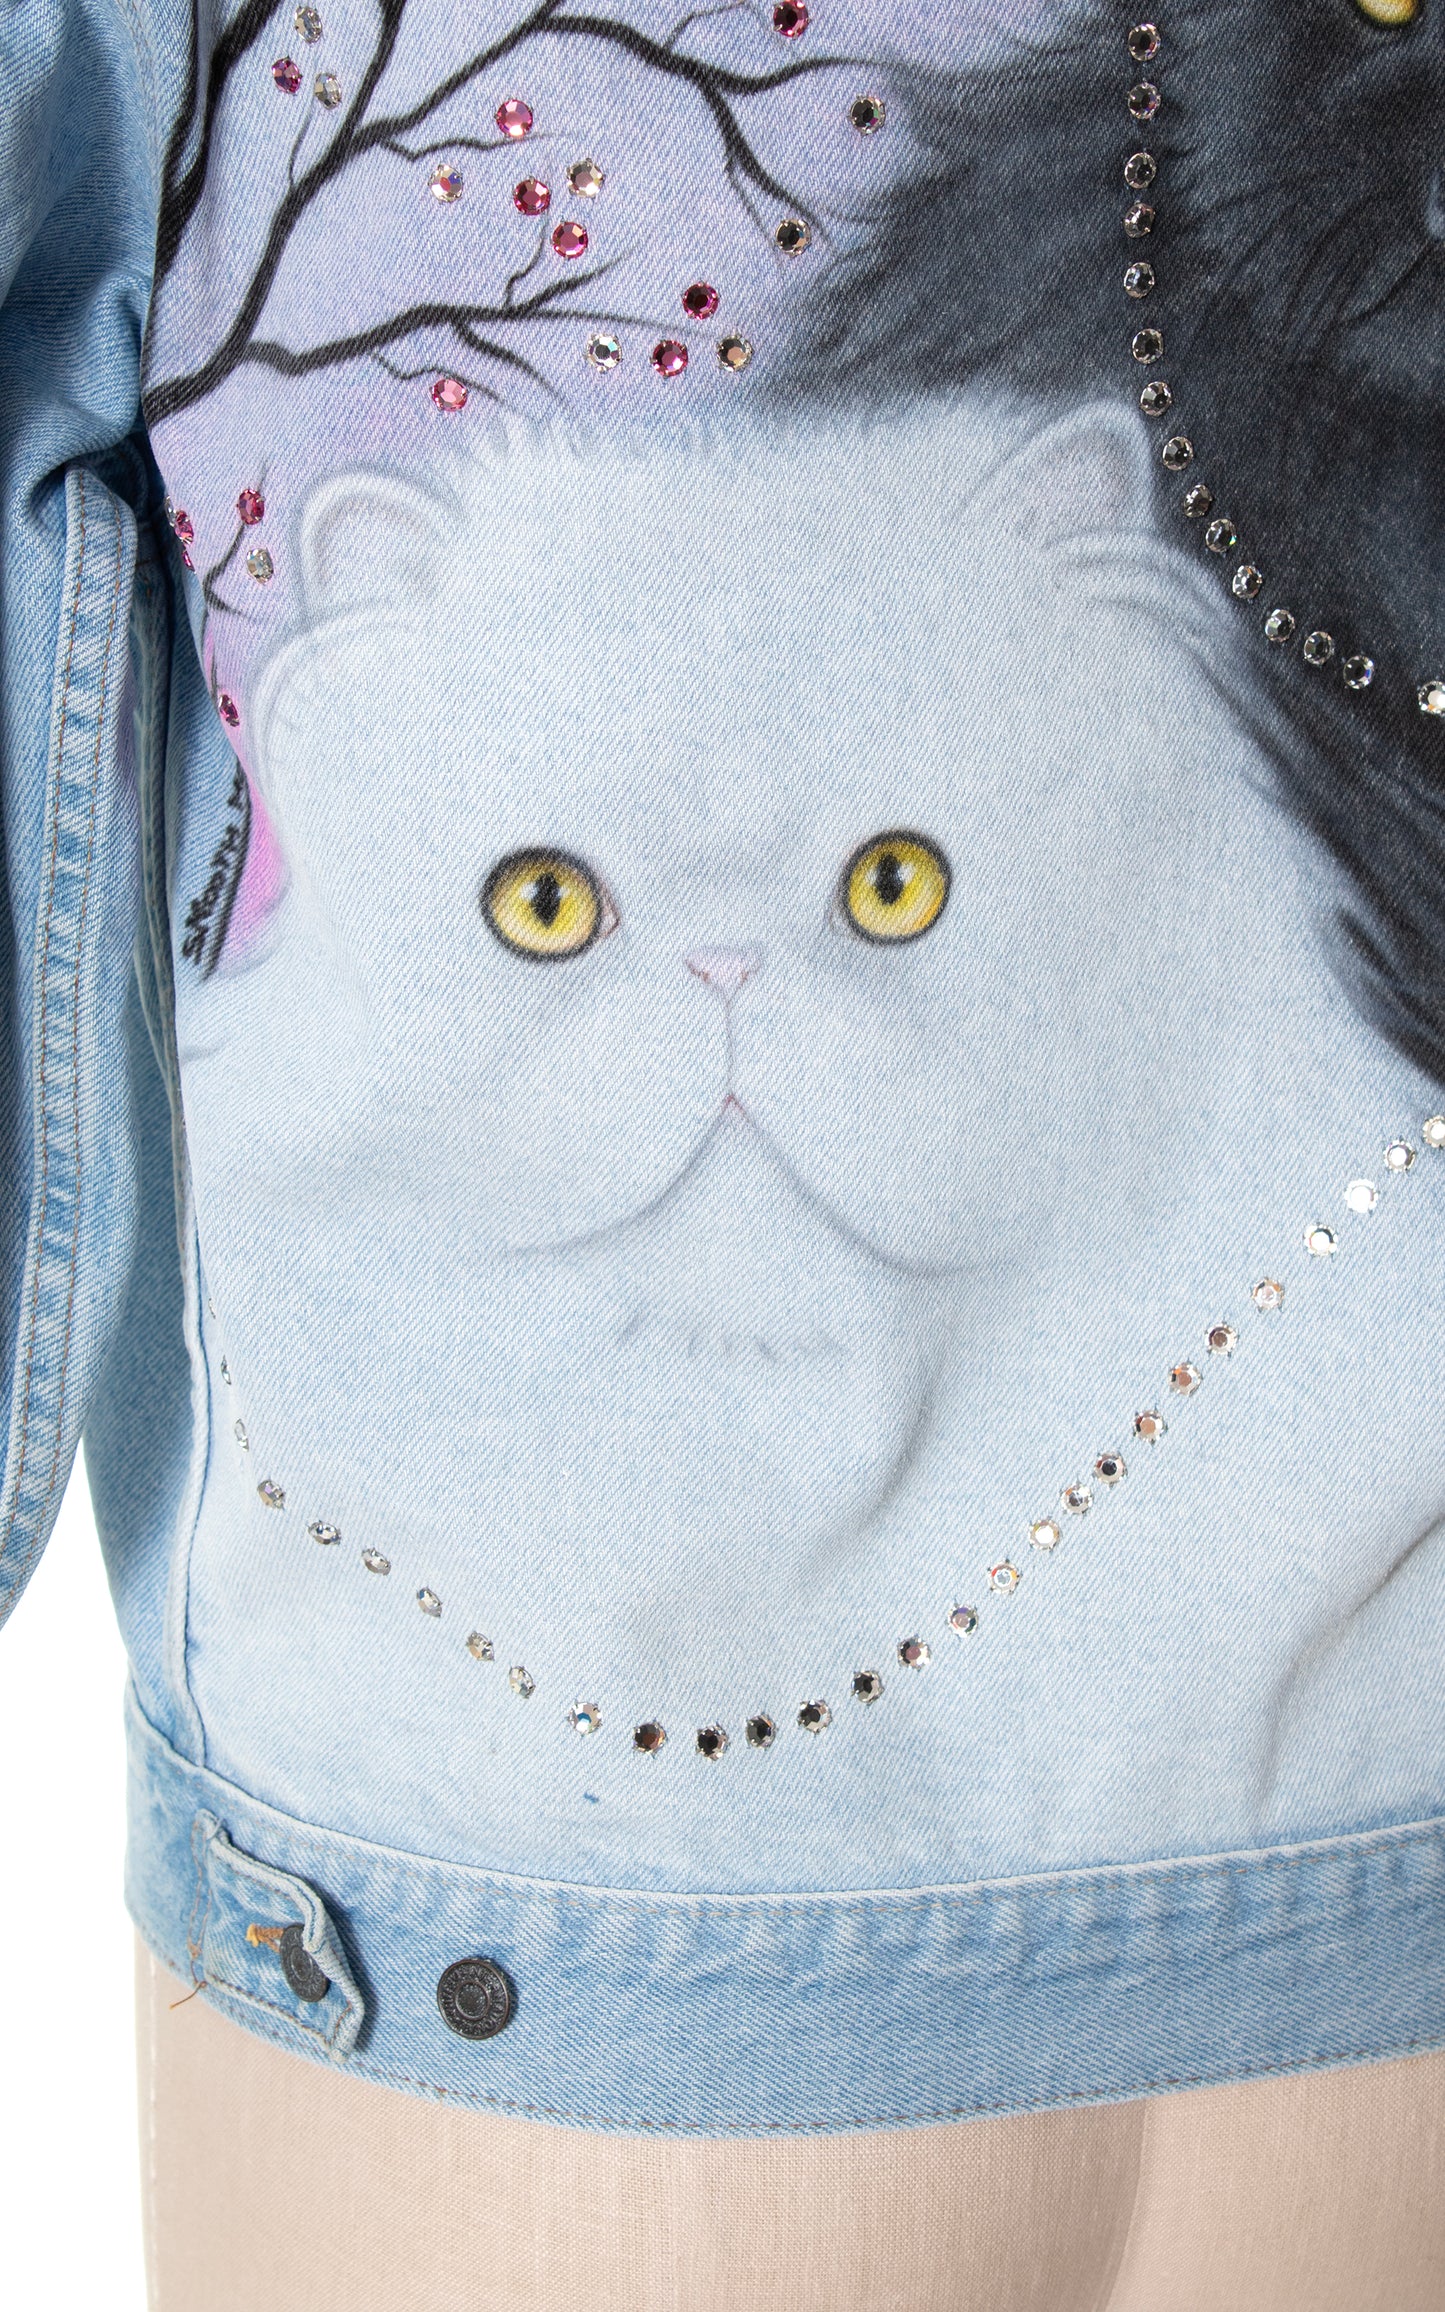 1990s Cat Novelty Print Hand-Painted Jean Jacket | large/x-large